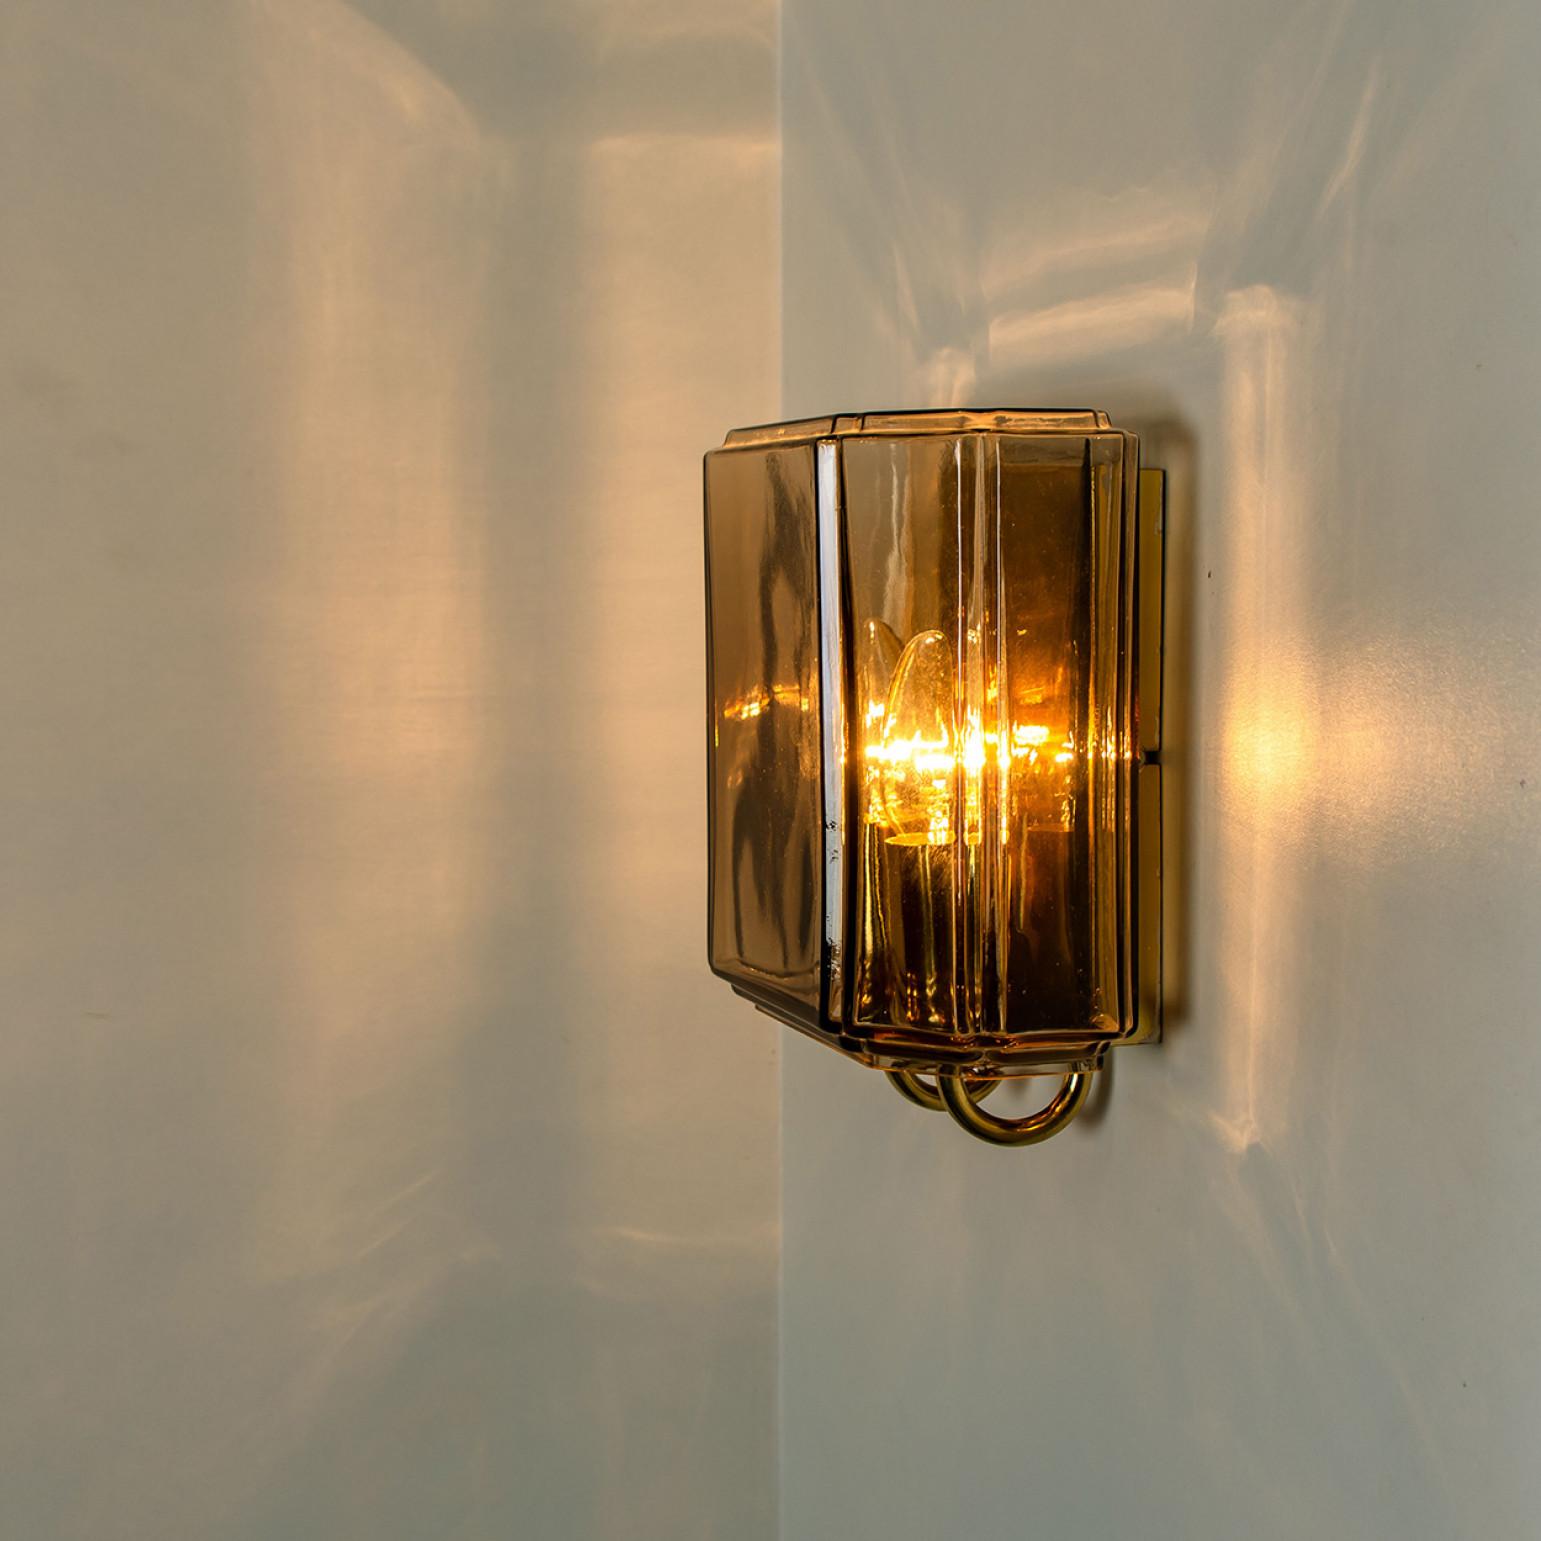 One of the two Pairs of Smoked Glass Wall Lights Sconces by Glashütte Limburg, 1 For Sale 4